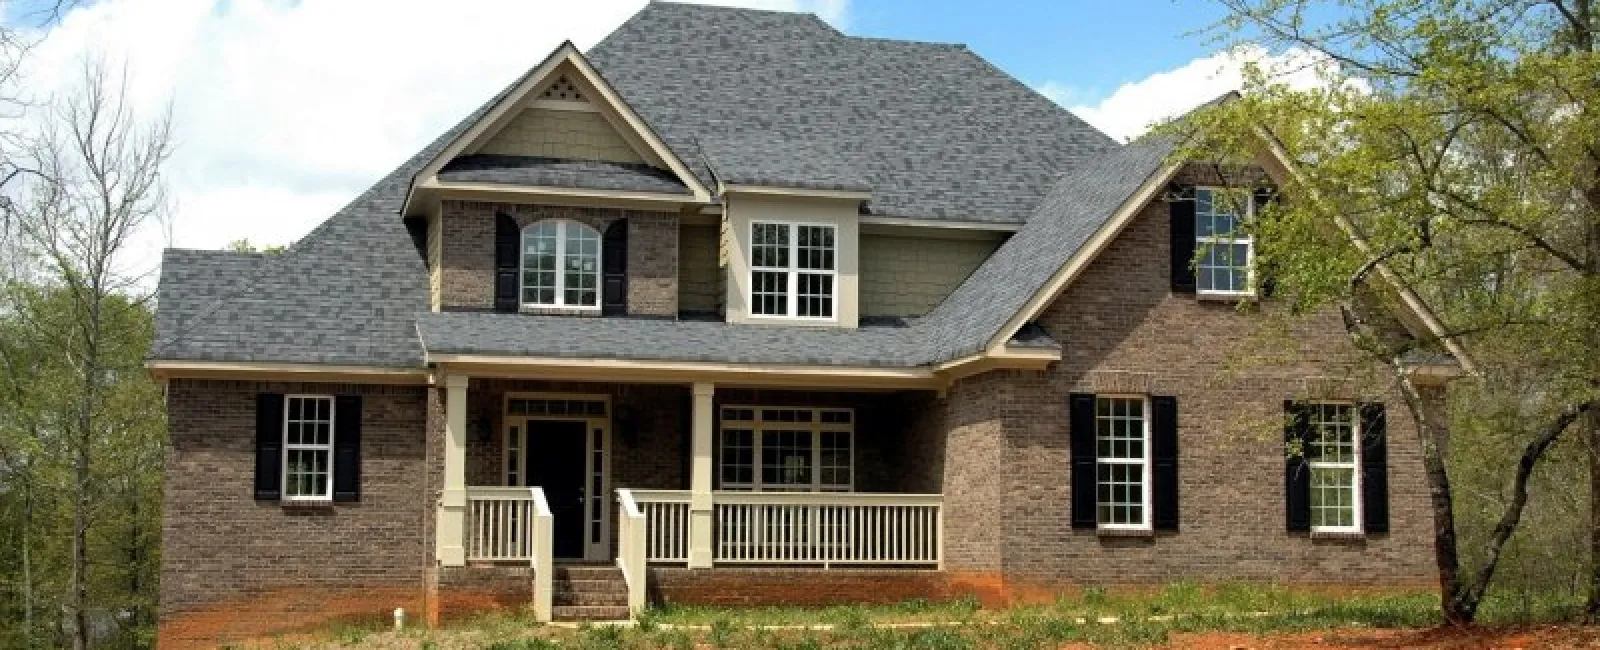 Main Types of Services Provided By Roofing Contractors